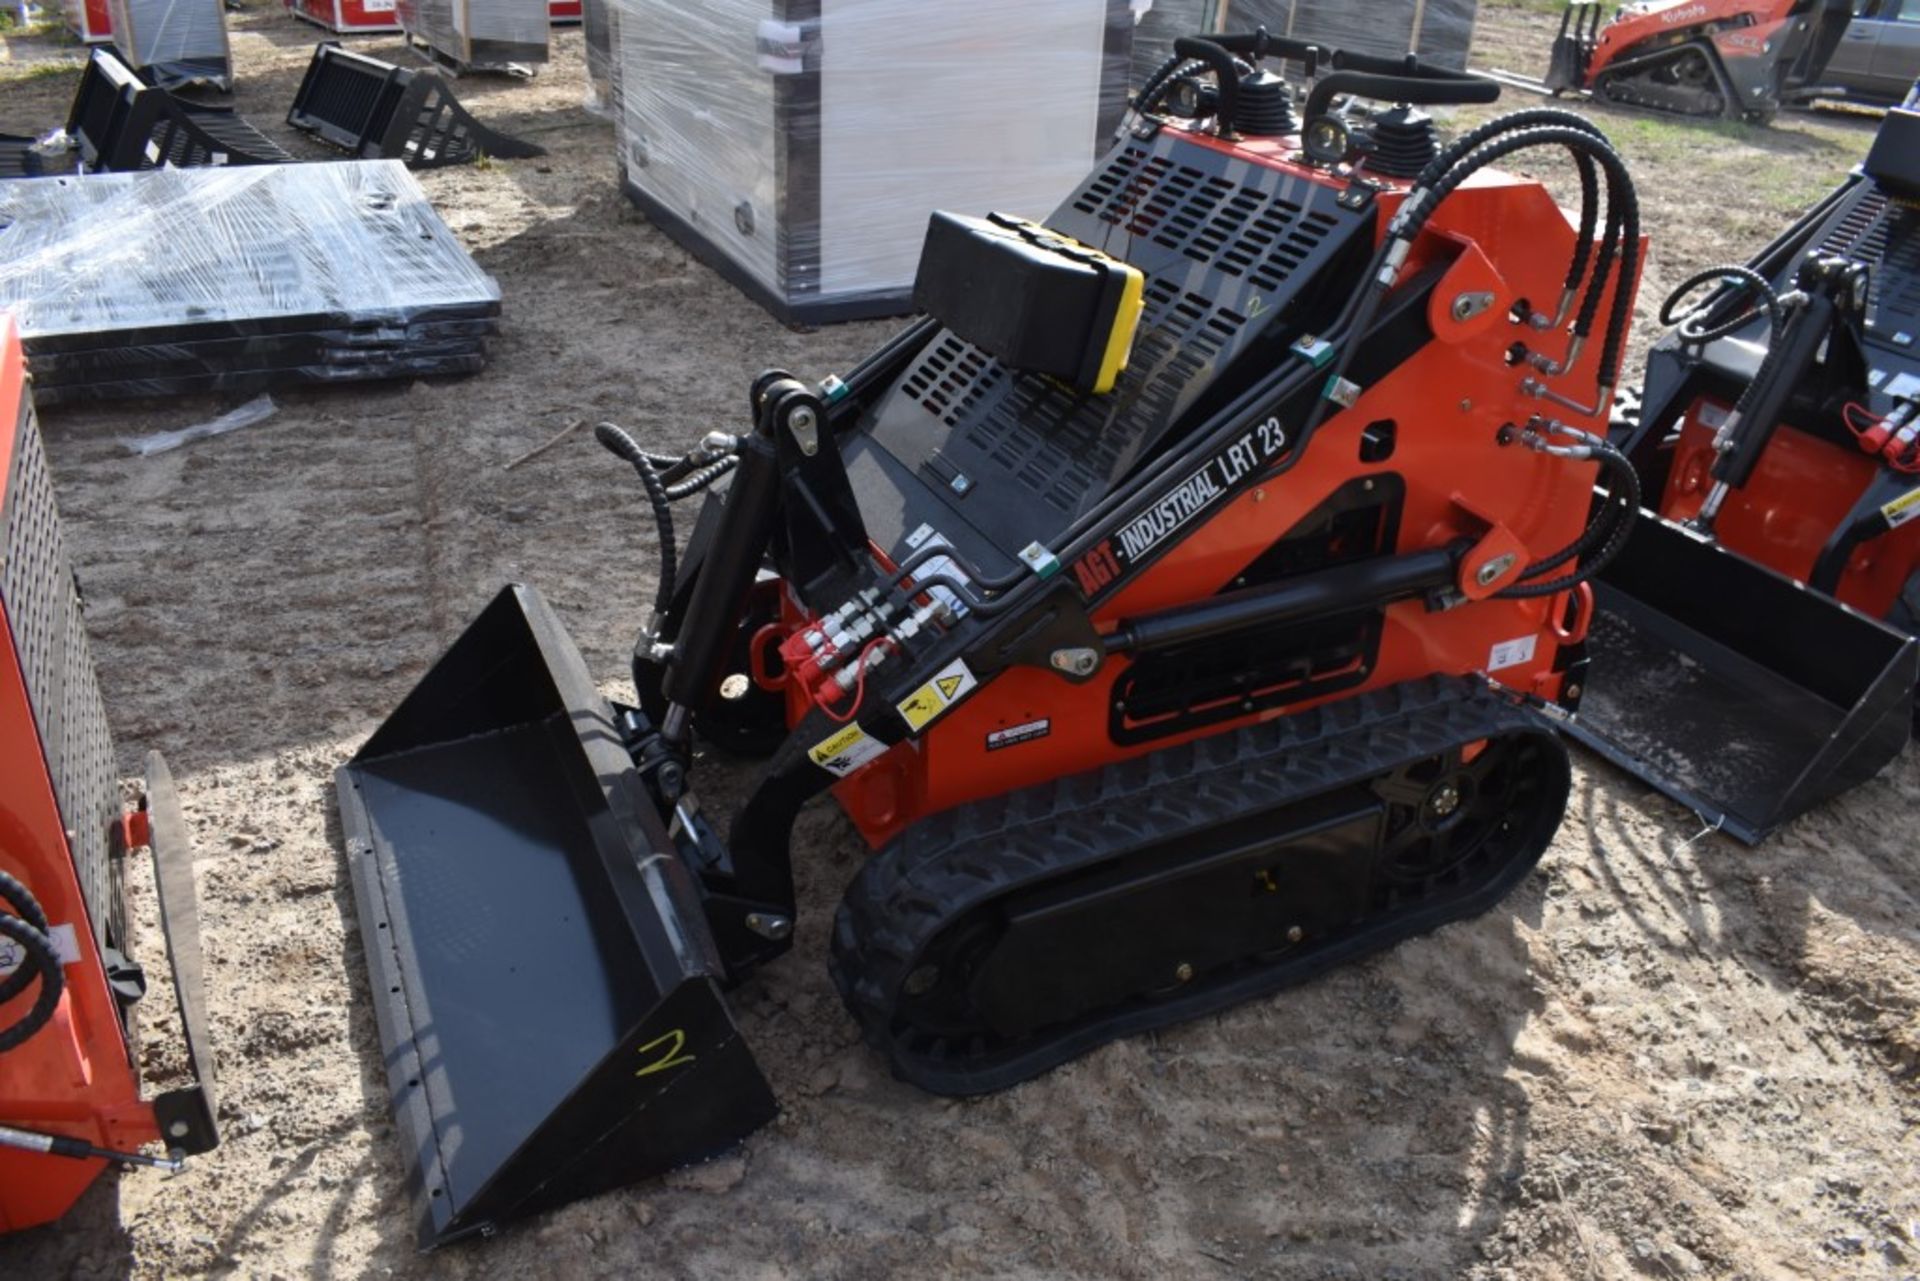 AGT Industrial LRT23 Skid Steer with Tracks Be Sure to Check Fluids, New, Mechanical Mini Quick